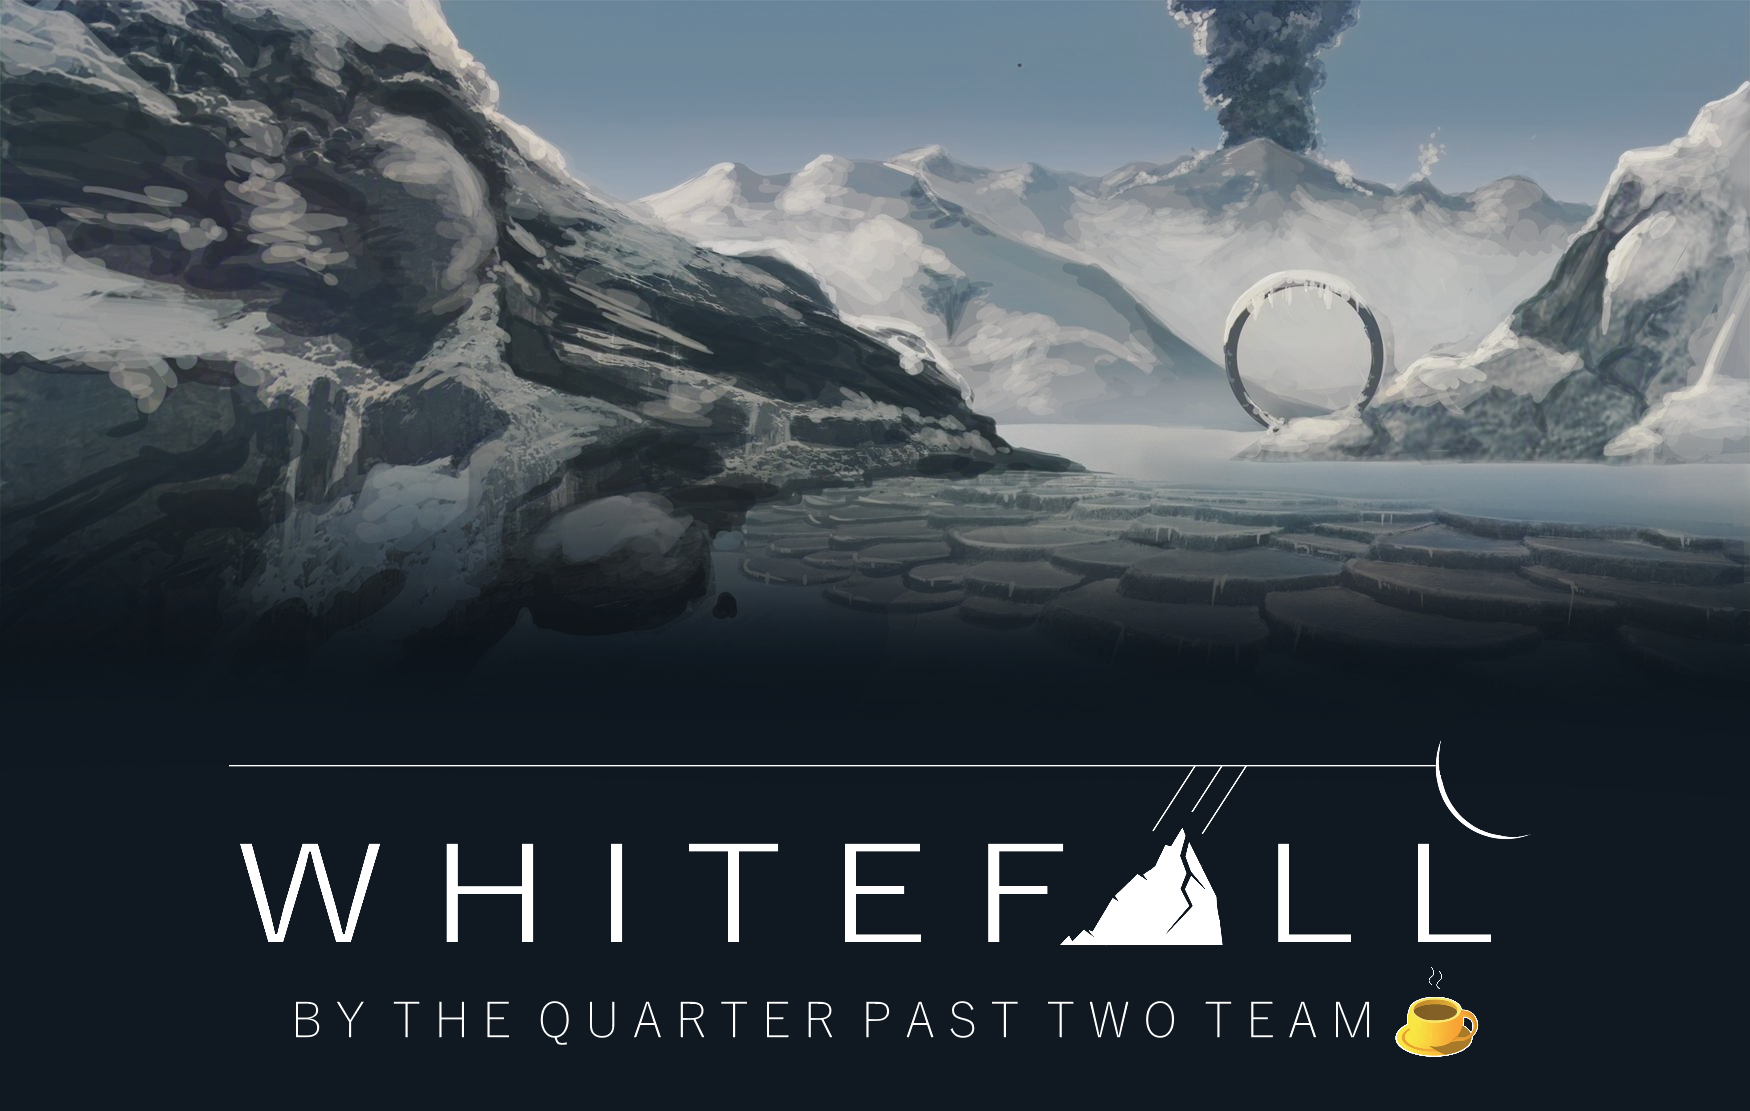 Whitefall